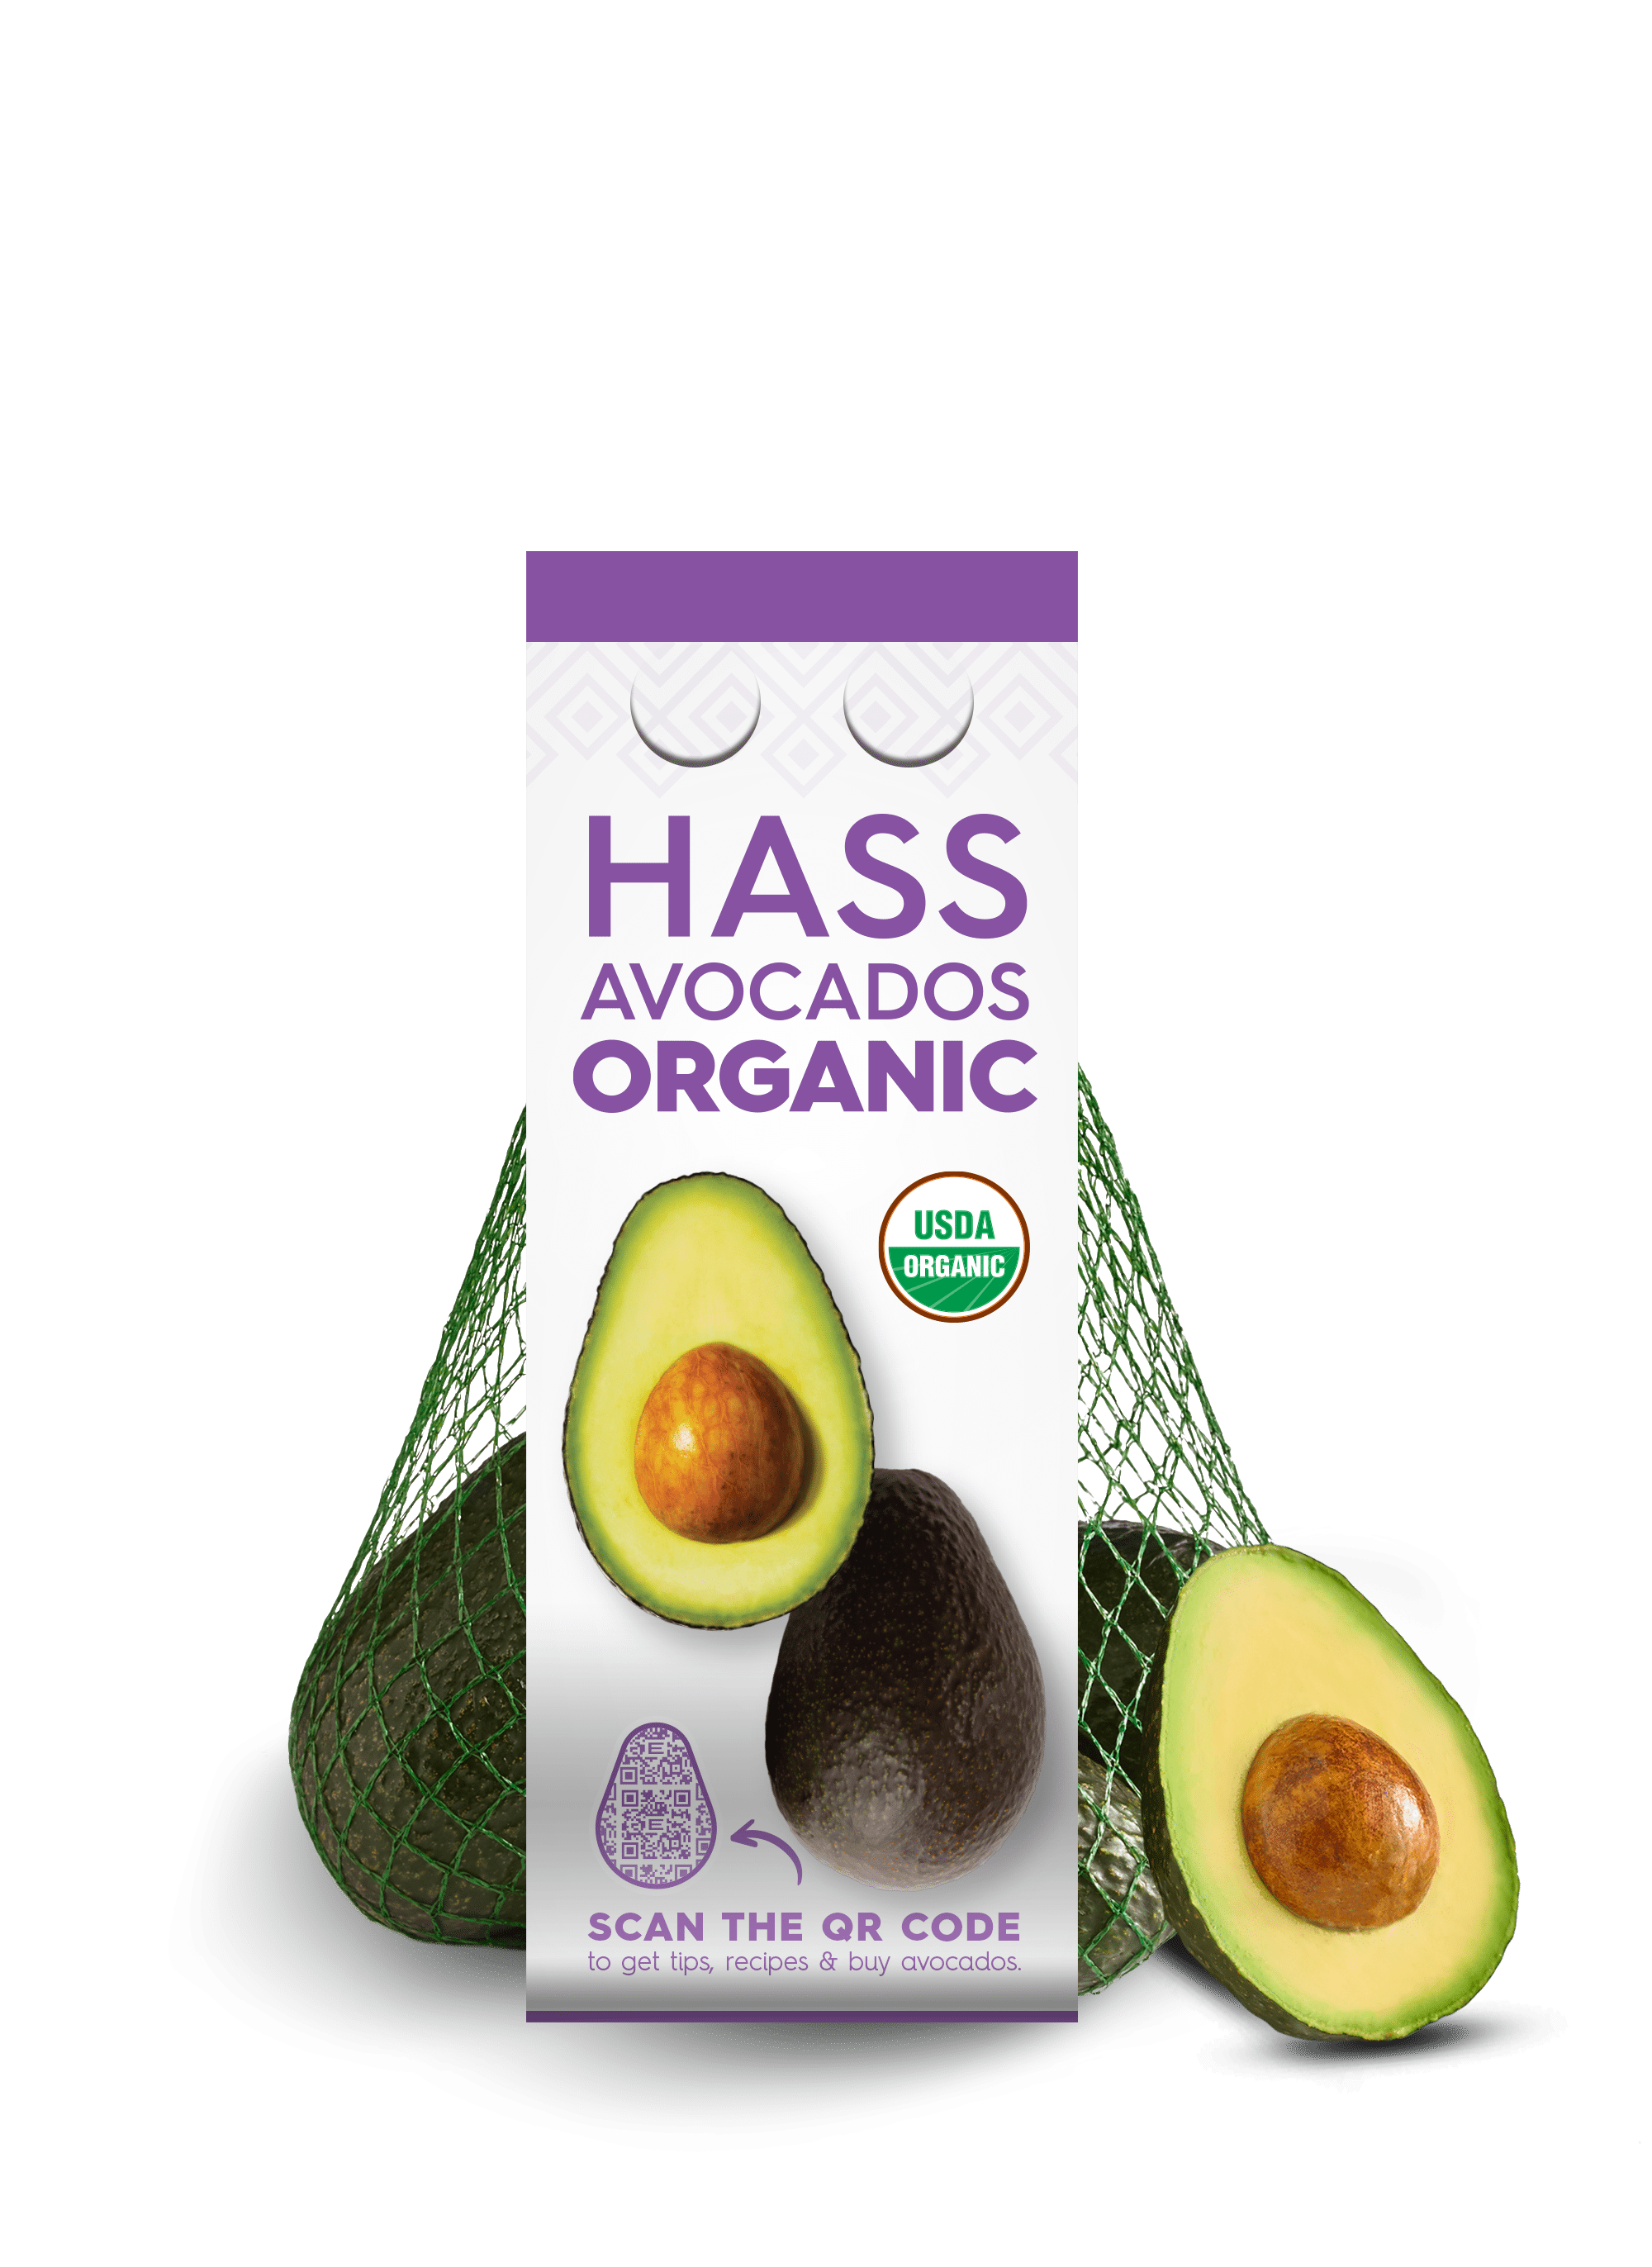 Hass Avocado Board offers insight on bagged and bulk avocado